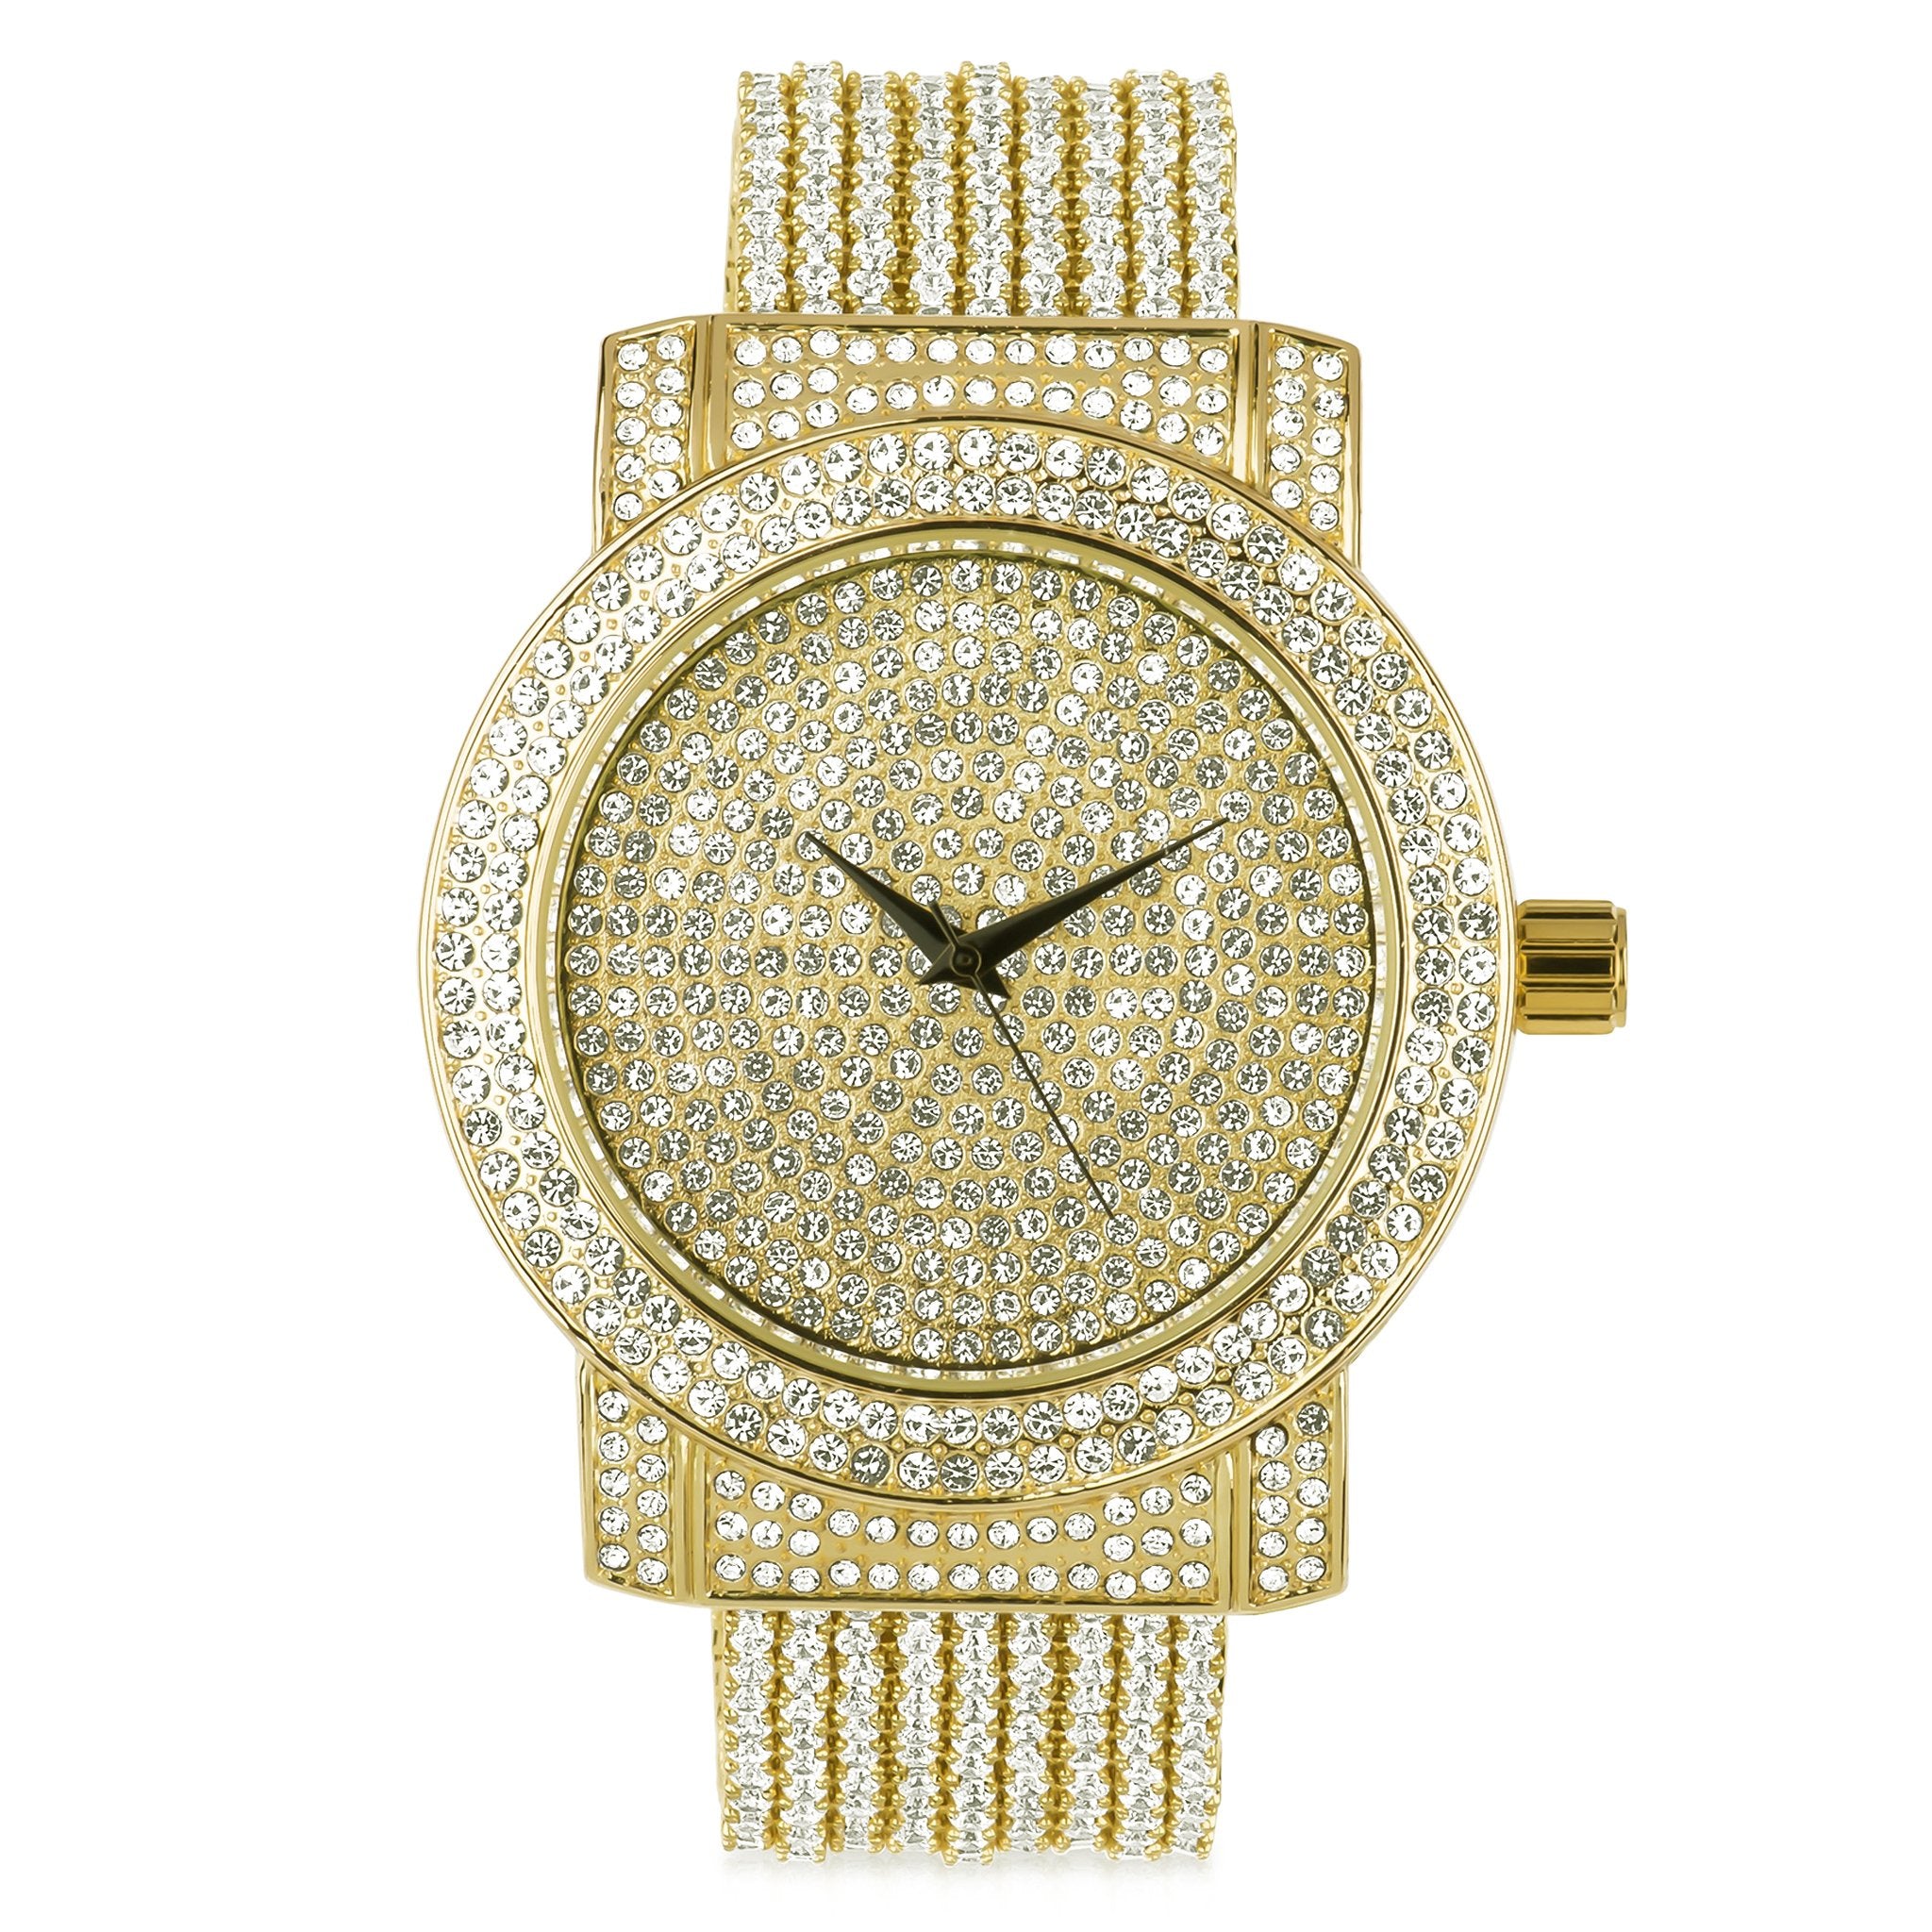 Beguiling CZ WATCH - 5110272